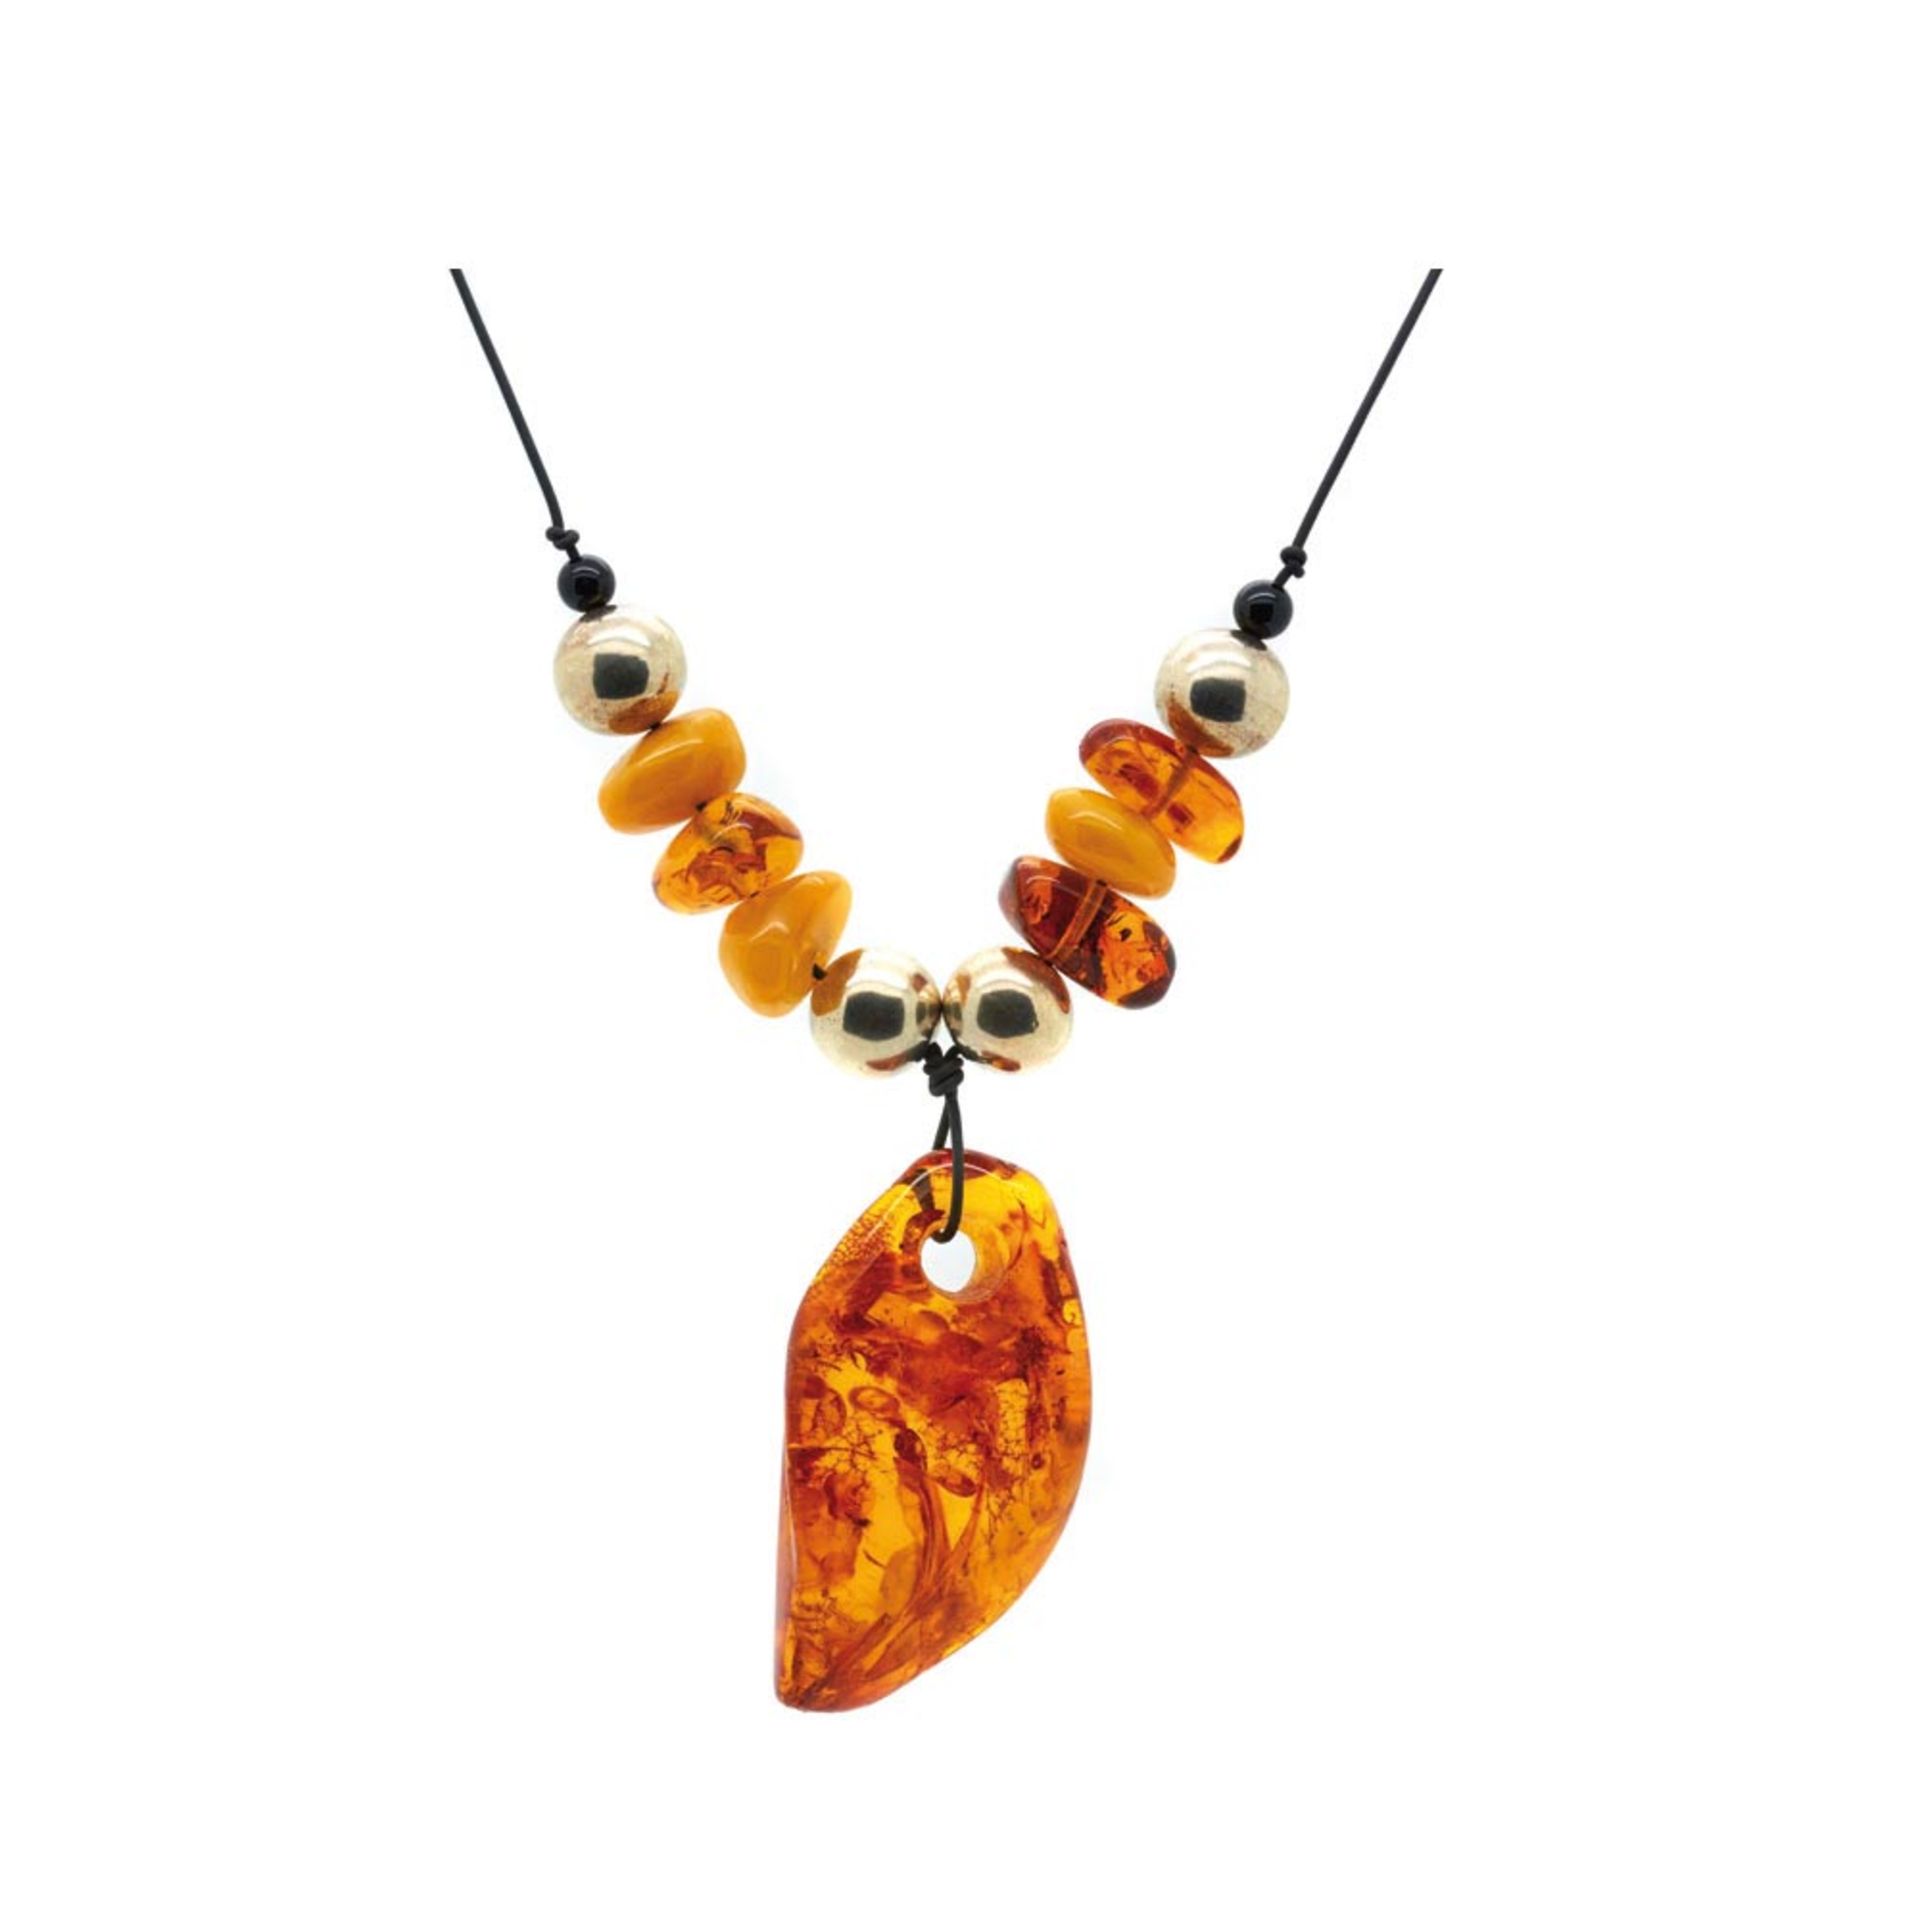 Amber, silver and rubber necklace